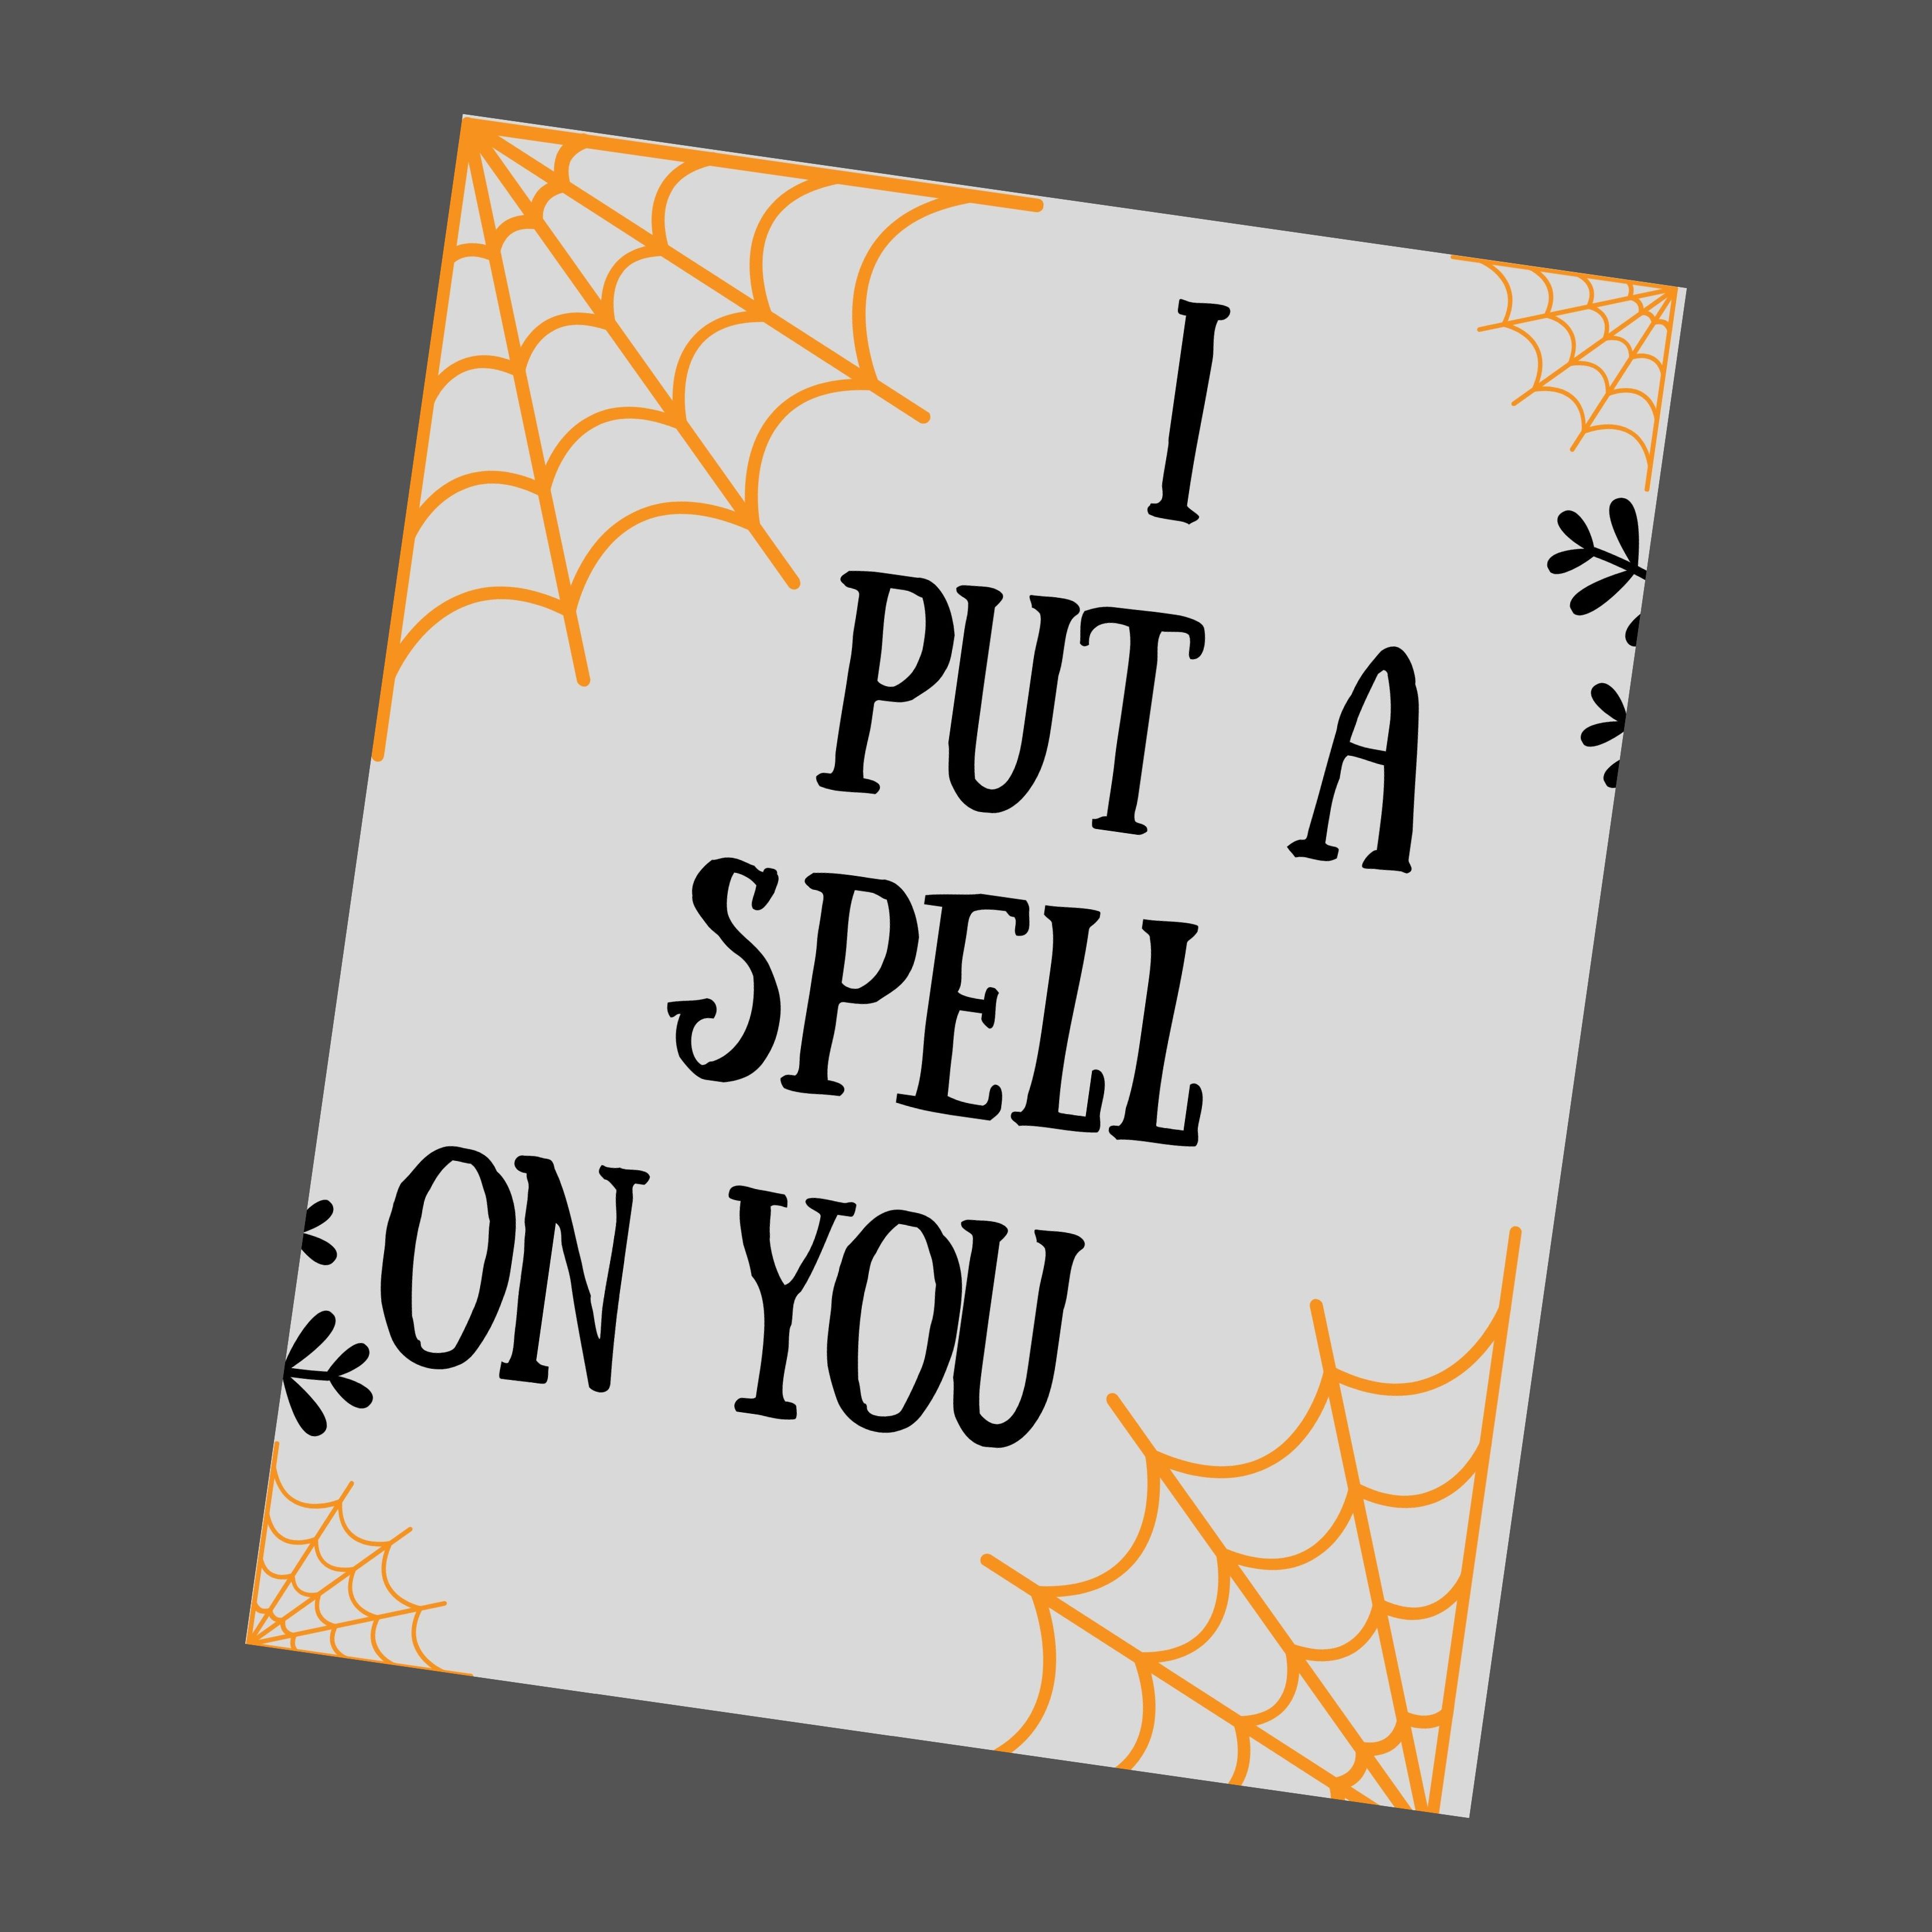 A grey halloween printable with yellow spider webs that says " I put a spell on you".